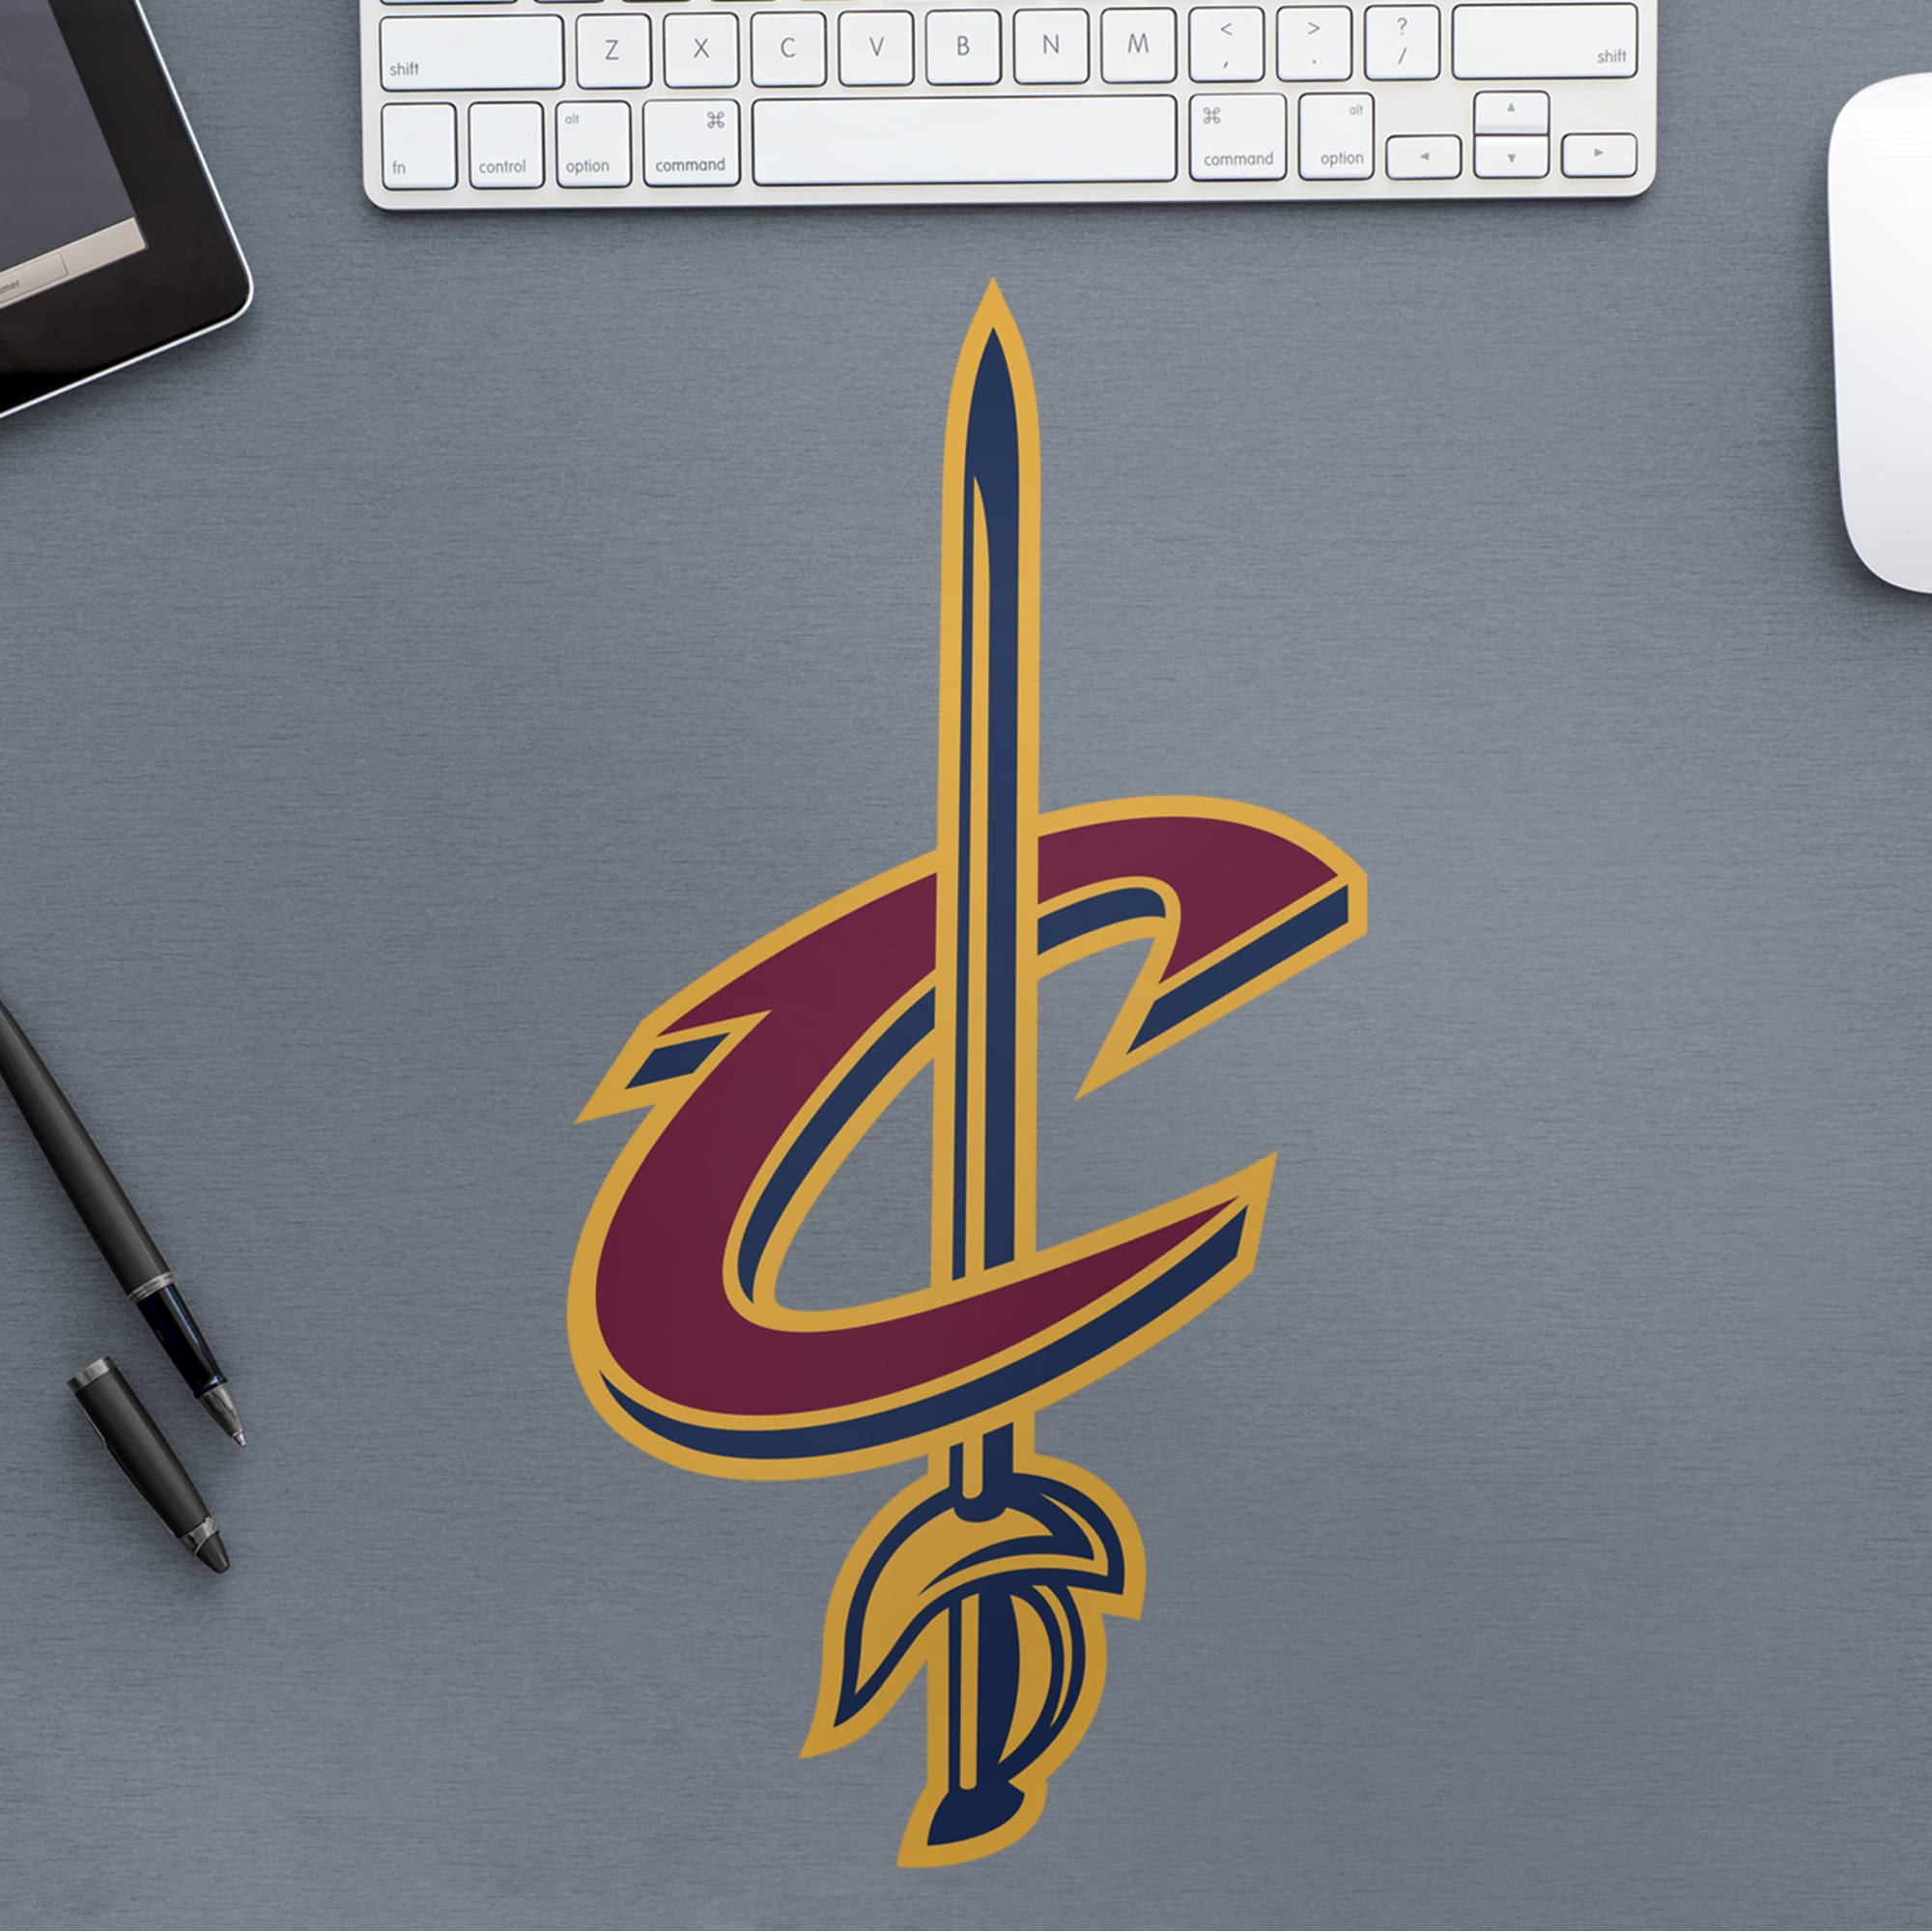 100+] Cleveland Cavaliers Wallpapers